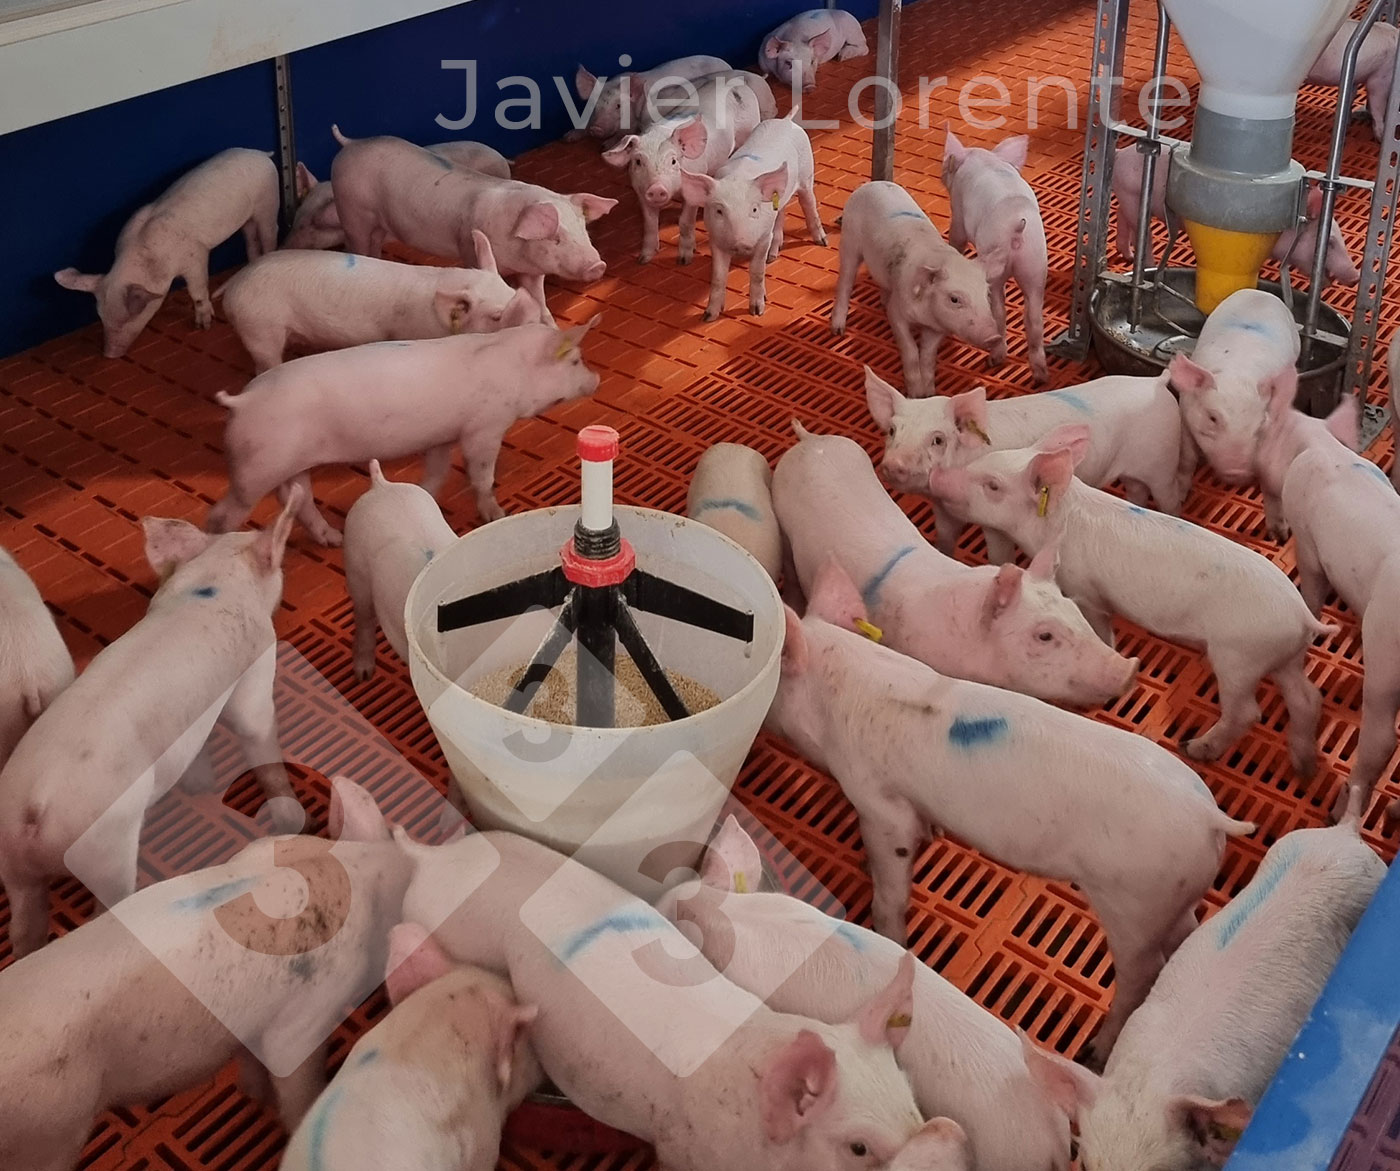 Piglets are now separated with feed available and in adequate conditions.